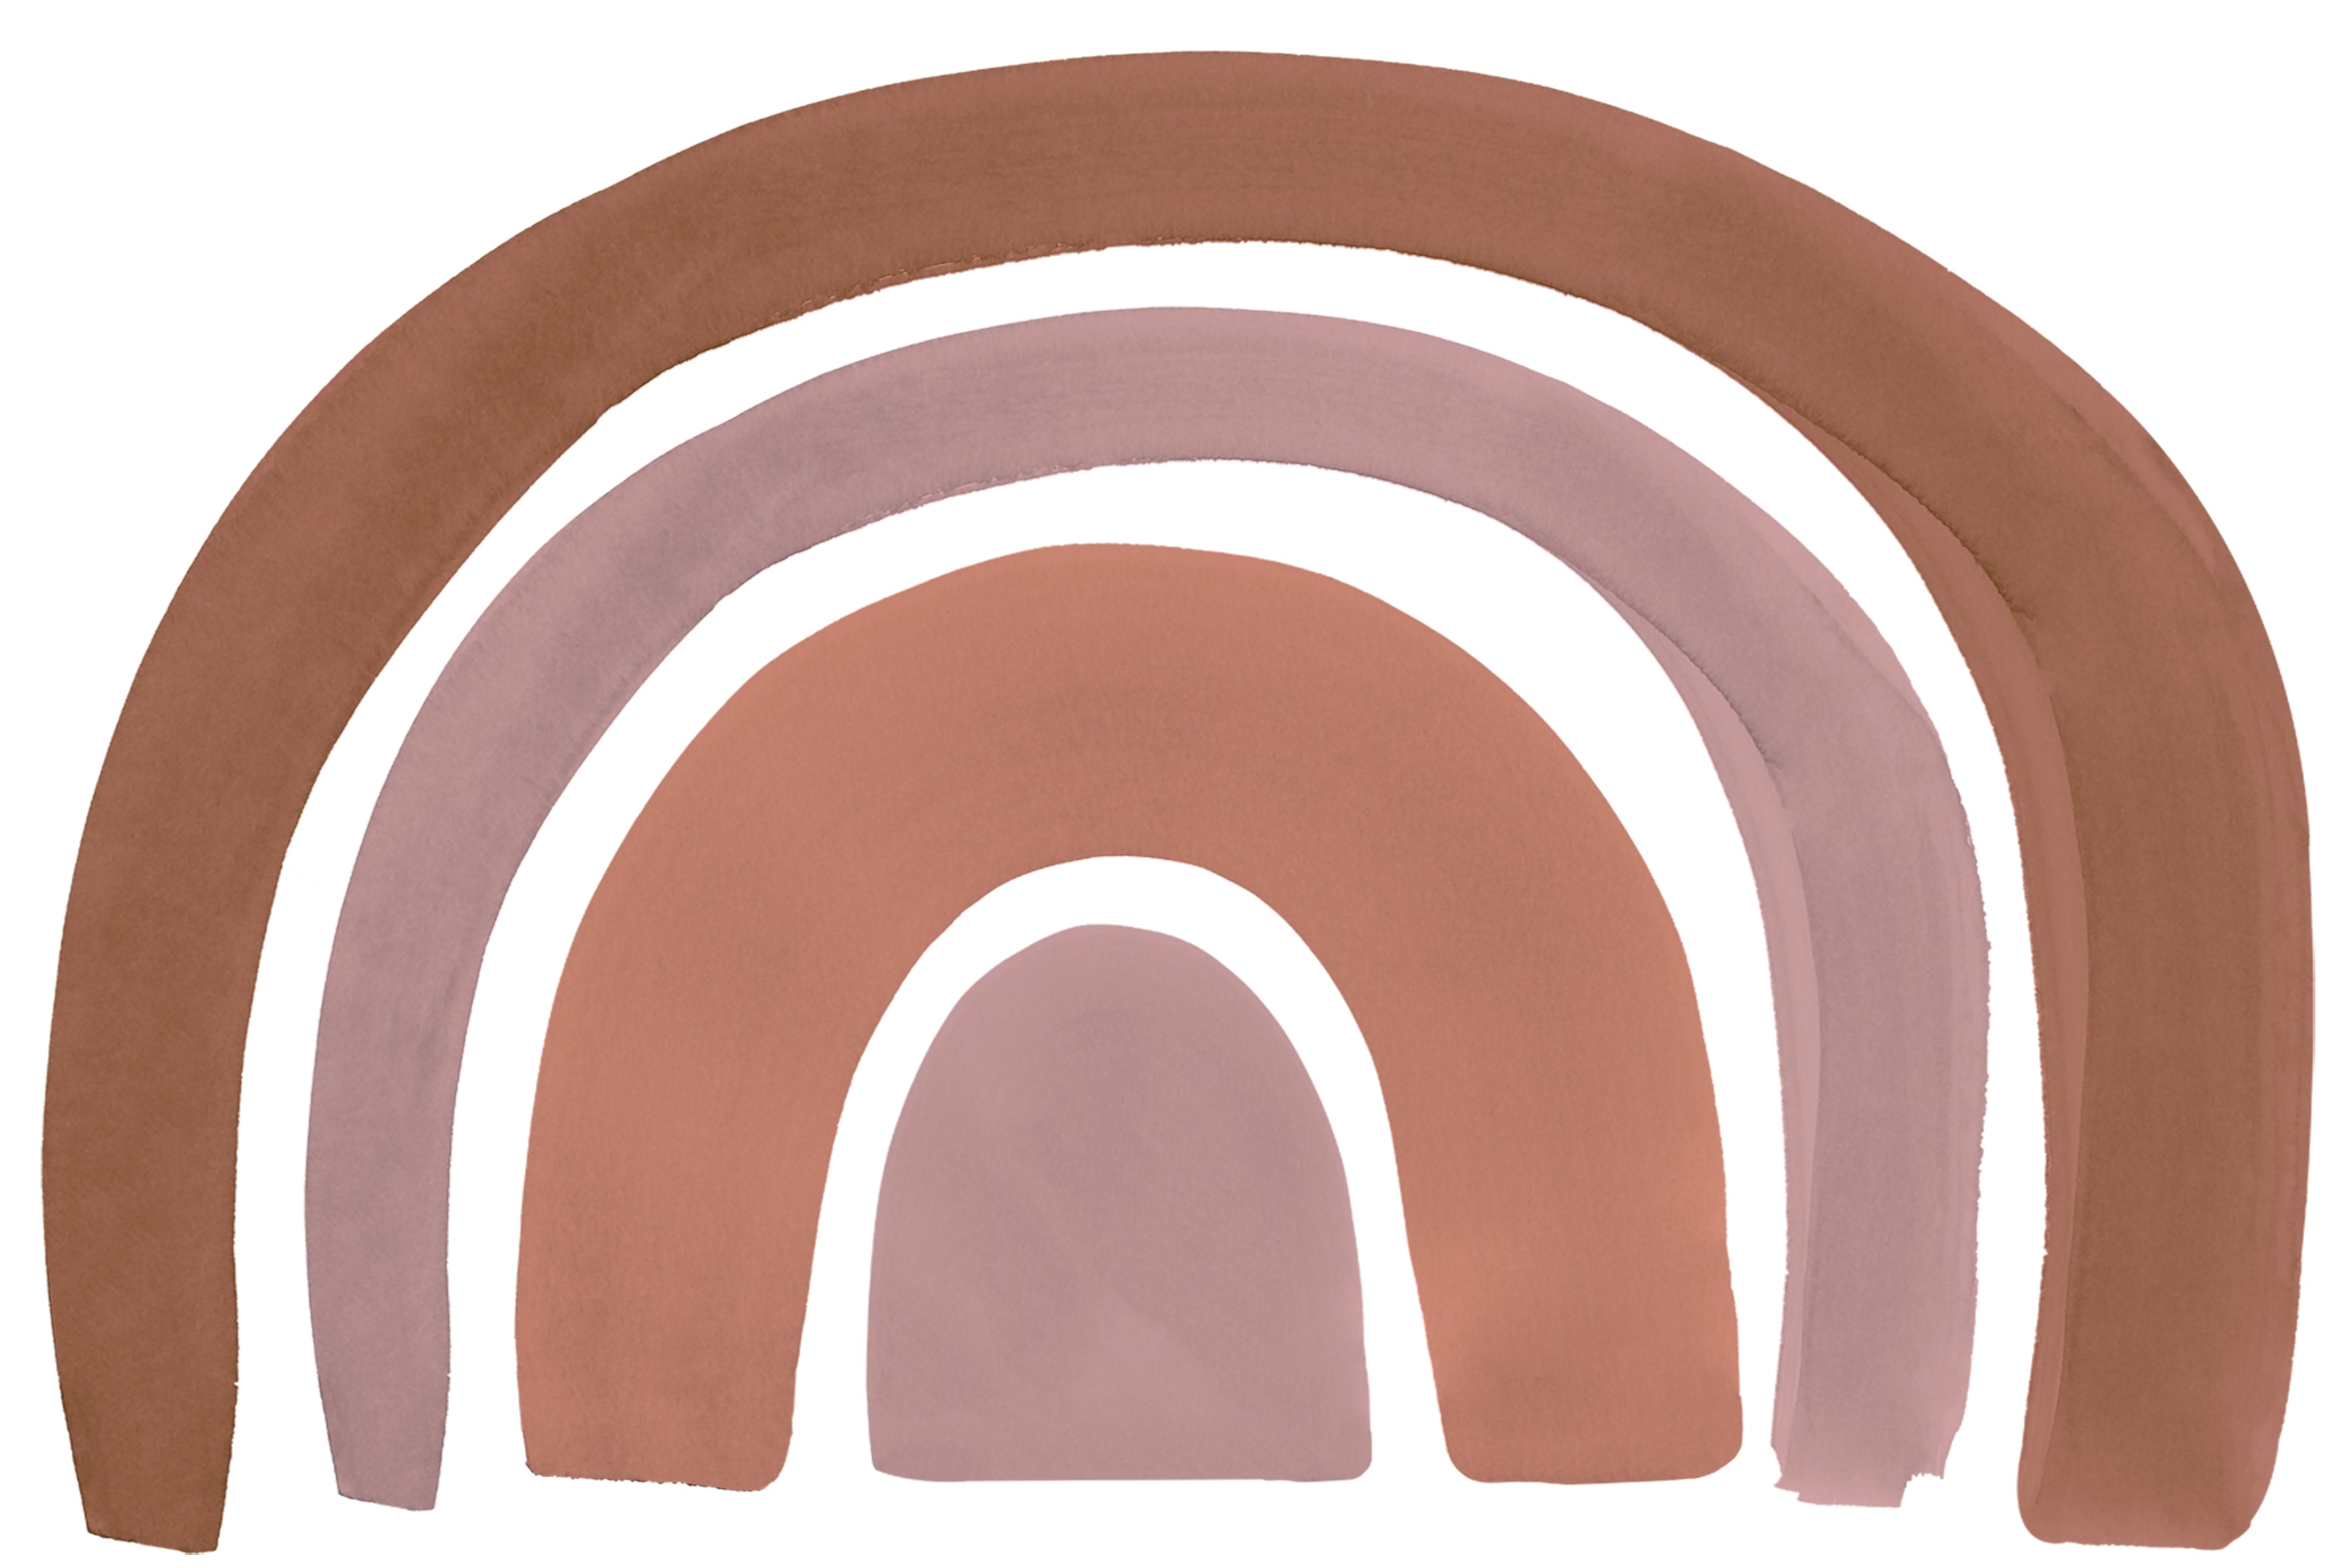 A minimalist design featuring broad arches in shades of brown and pink. The simple yet stylish pattern depicts a trio of arches with a watercolor texture, creating a serene and modern aesthetic.